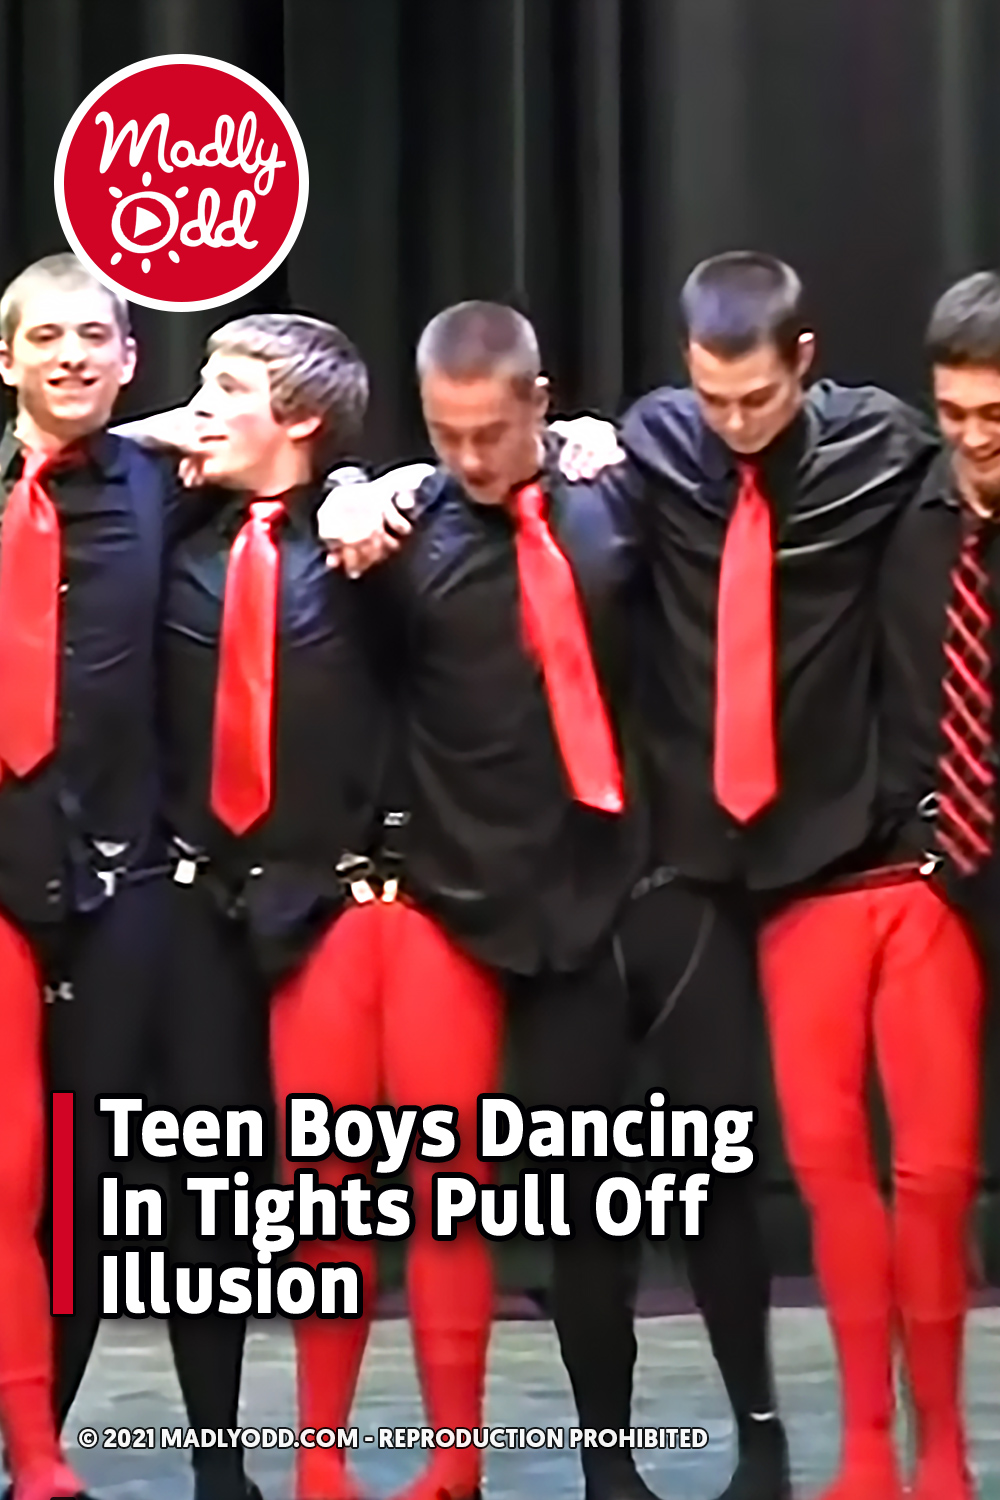 Teen Boys Dancing In Tights Pull Off Illusion